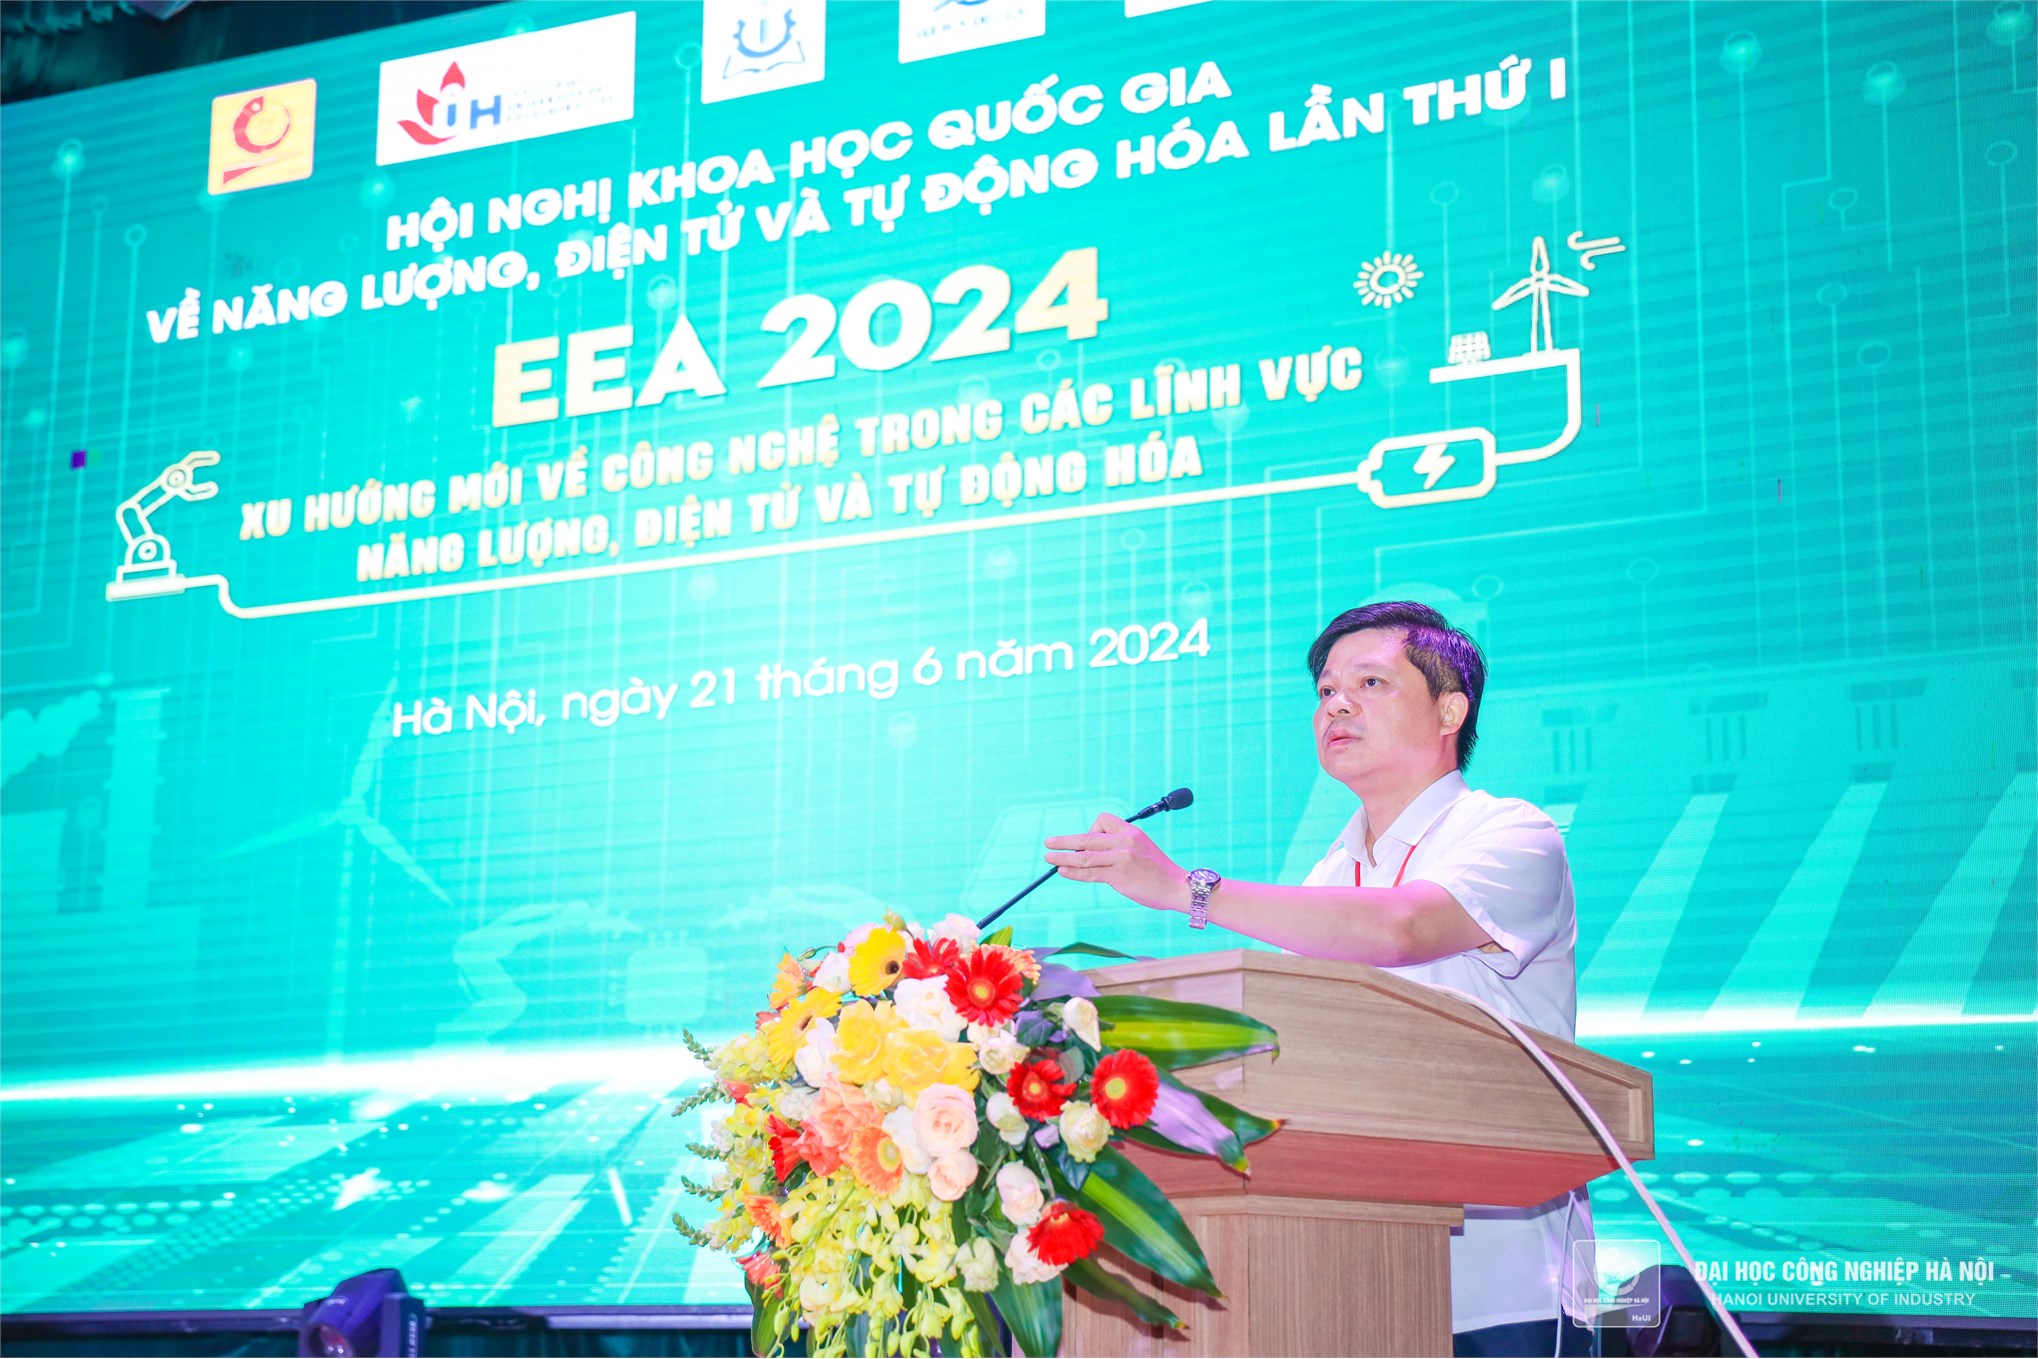 The First National Conference on Energy, Electronics, and Automation - EEA 2024